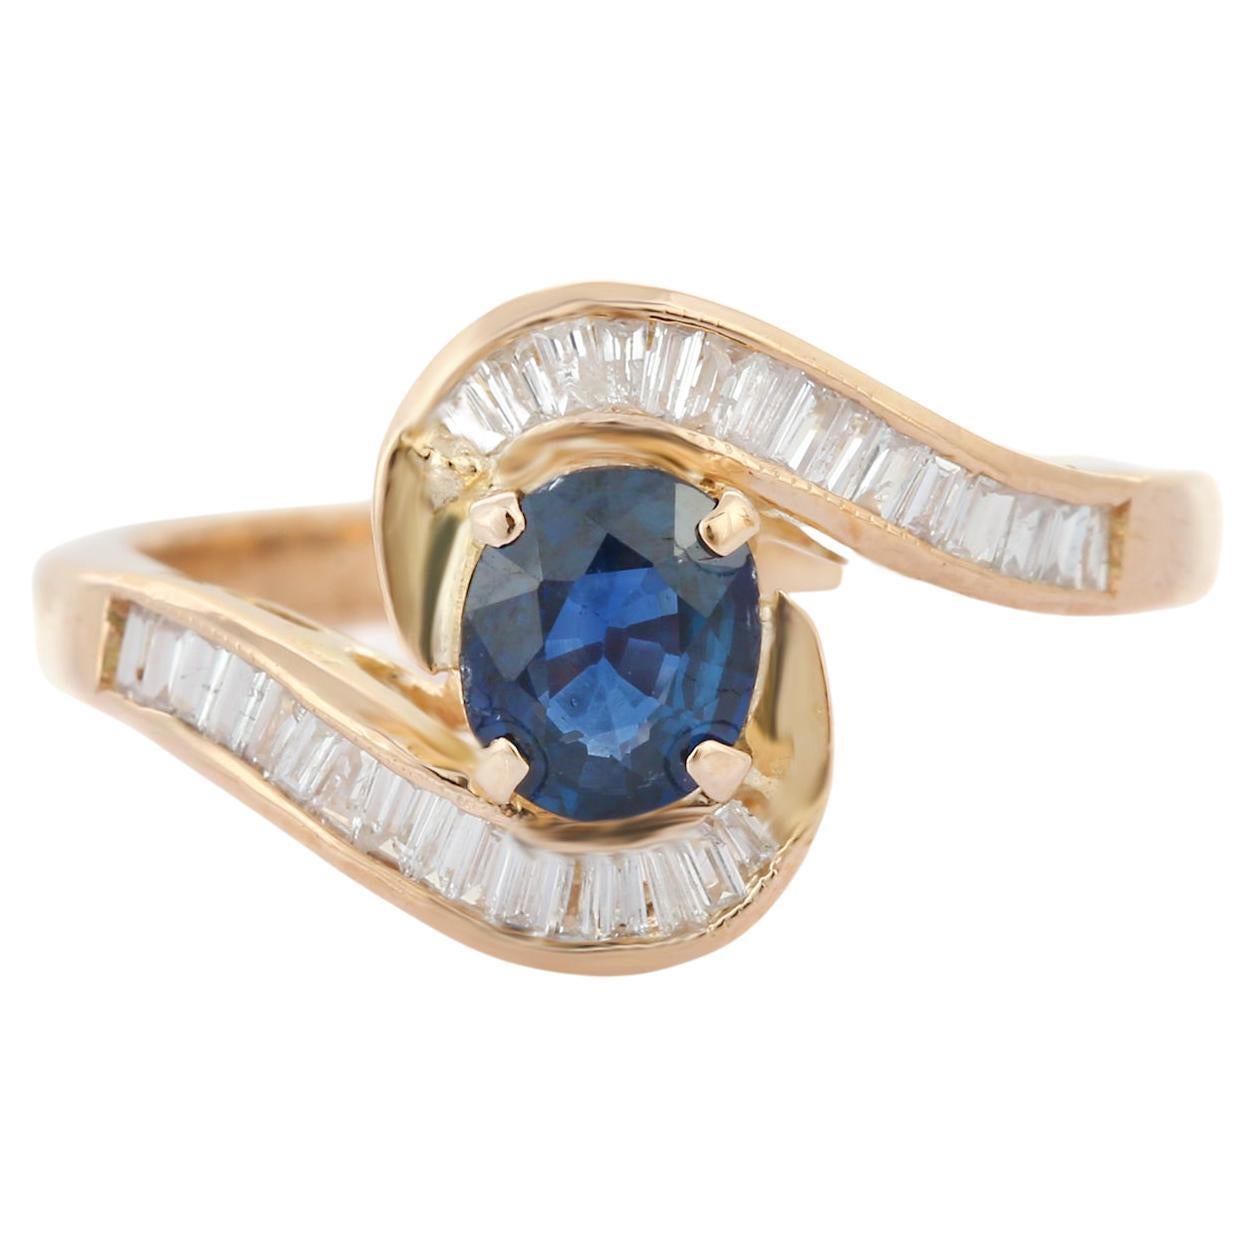 For Sale:  Diamond and Blue Sapphire Cross Shank Ring in 14k Solid Yellow Gold